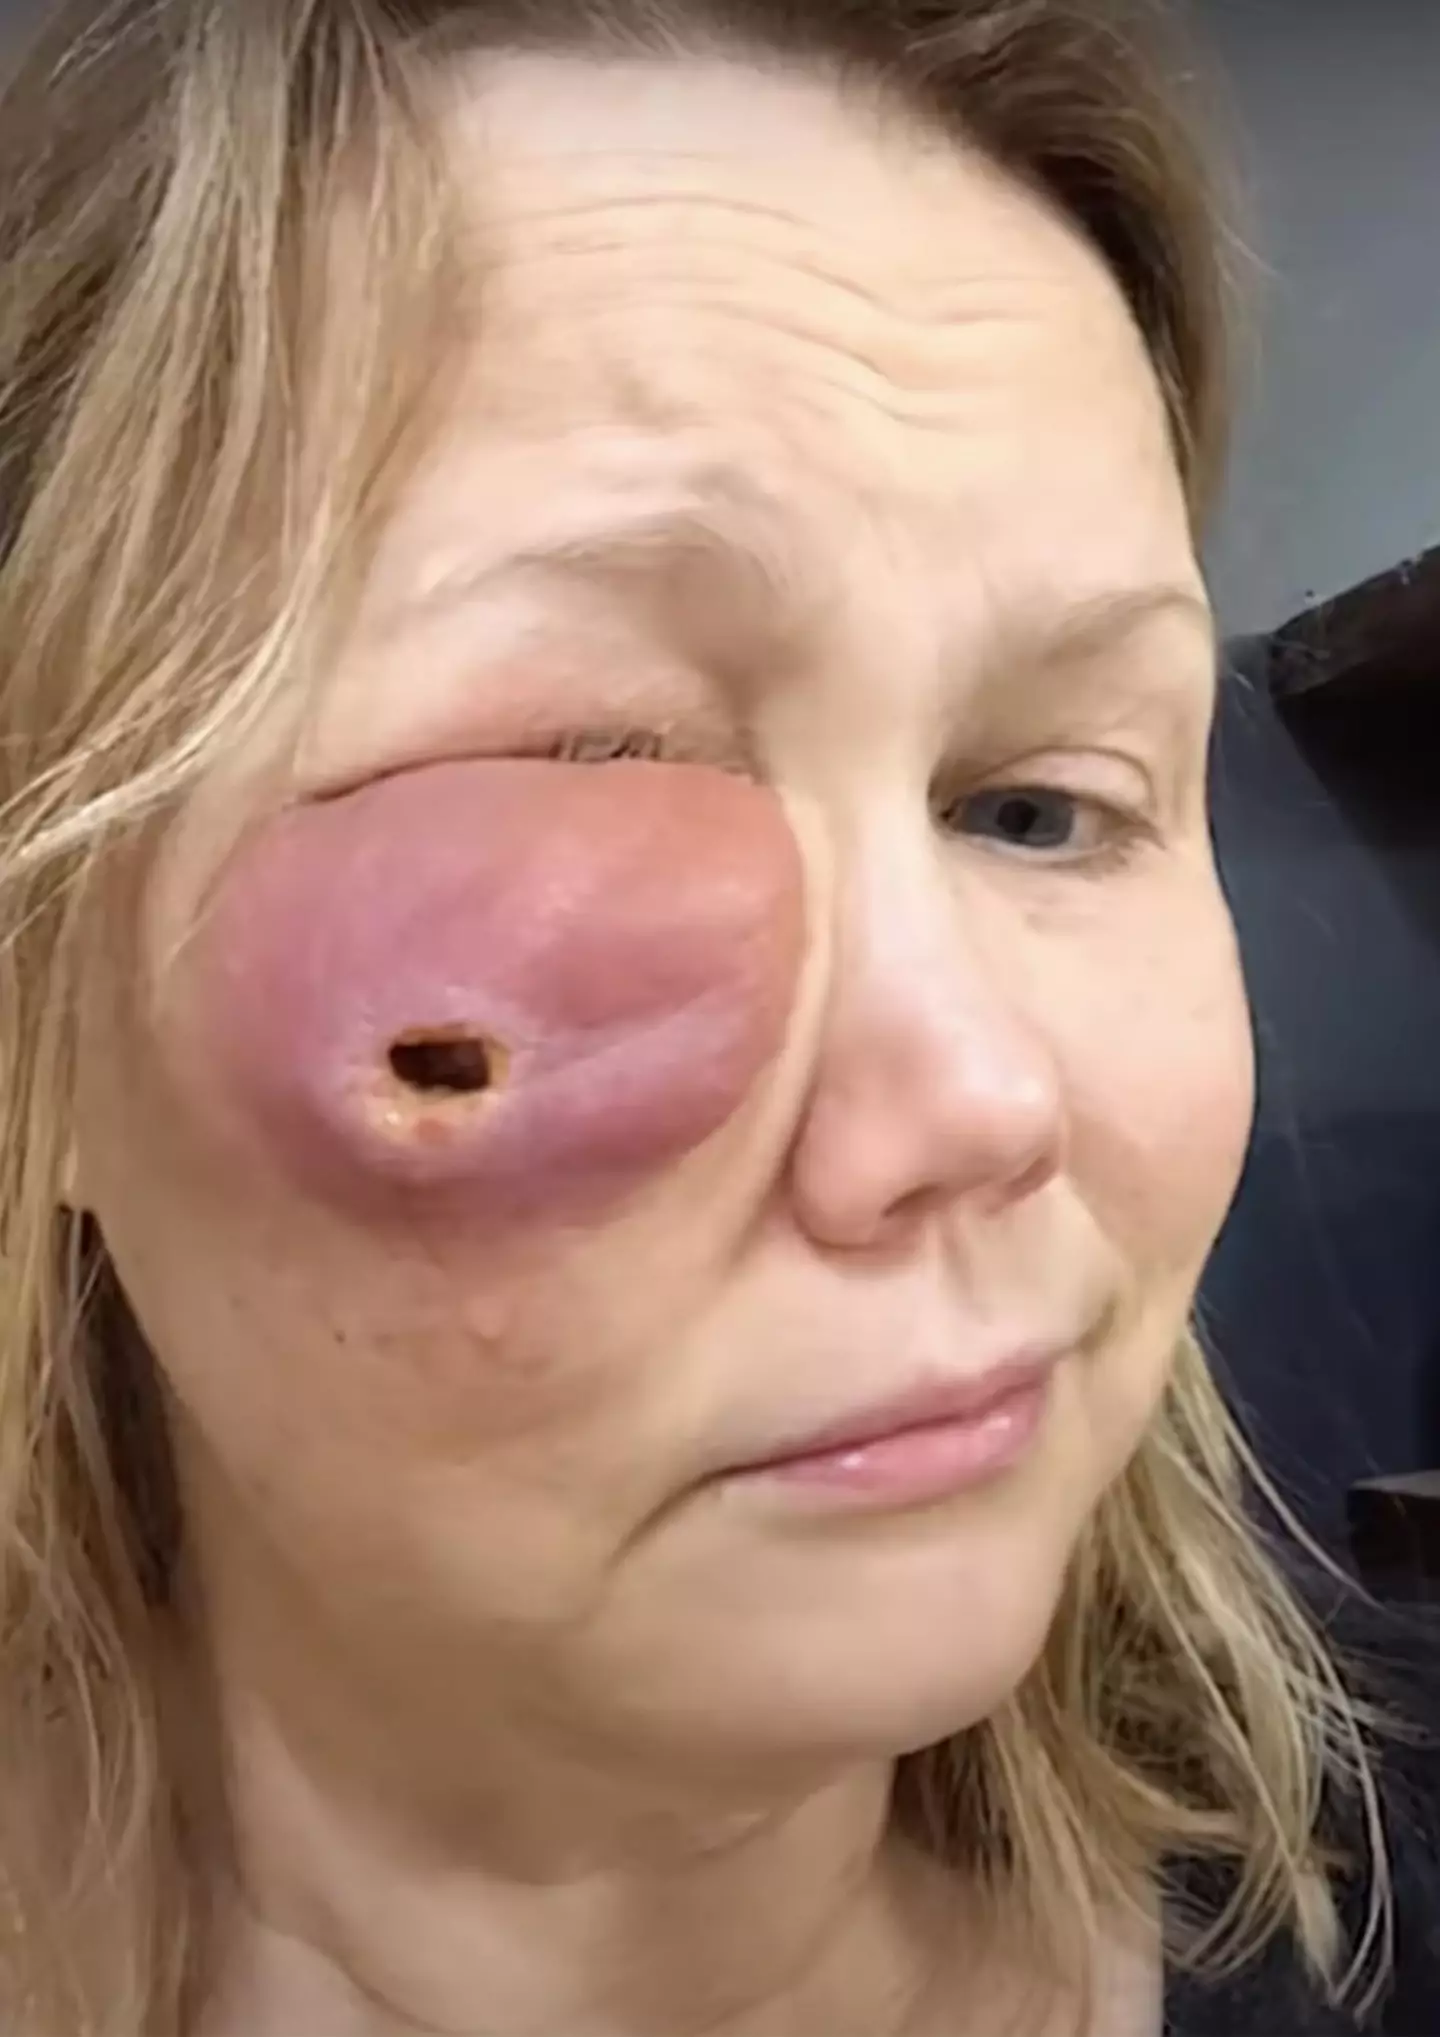 Gina Anderson was left with a painful hole in her face after a cosmetic procedure went wrong.